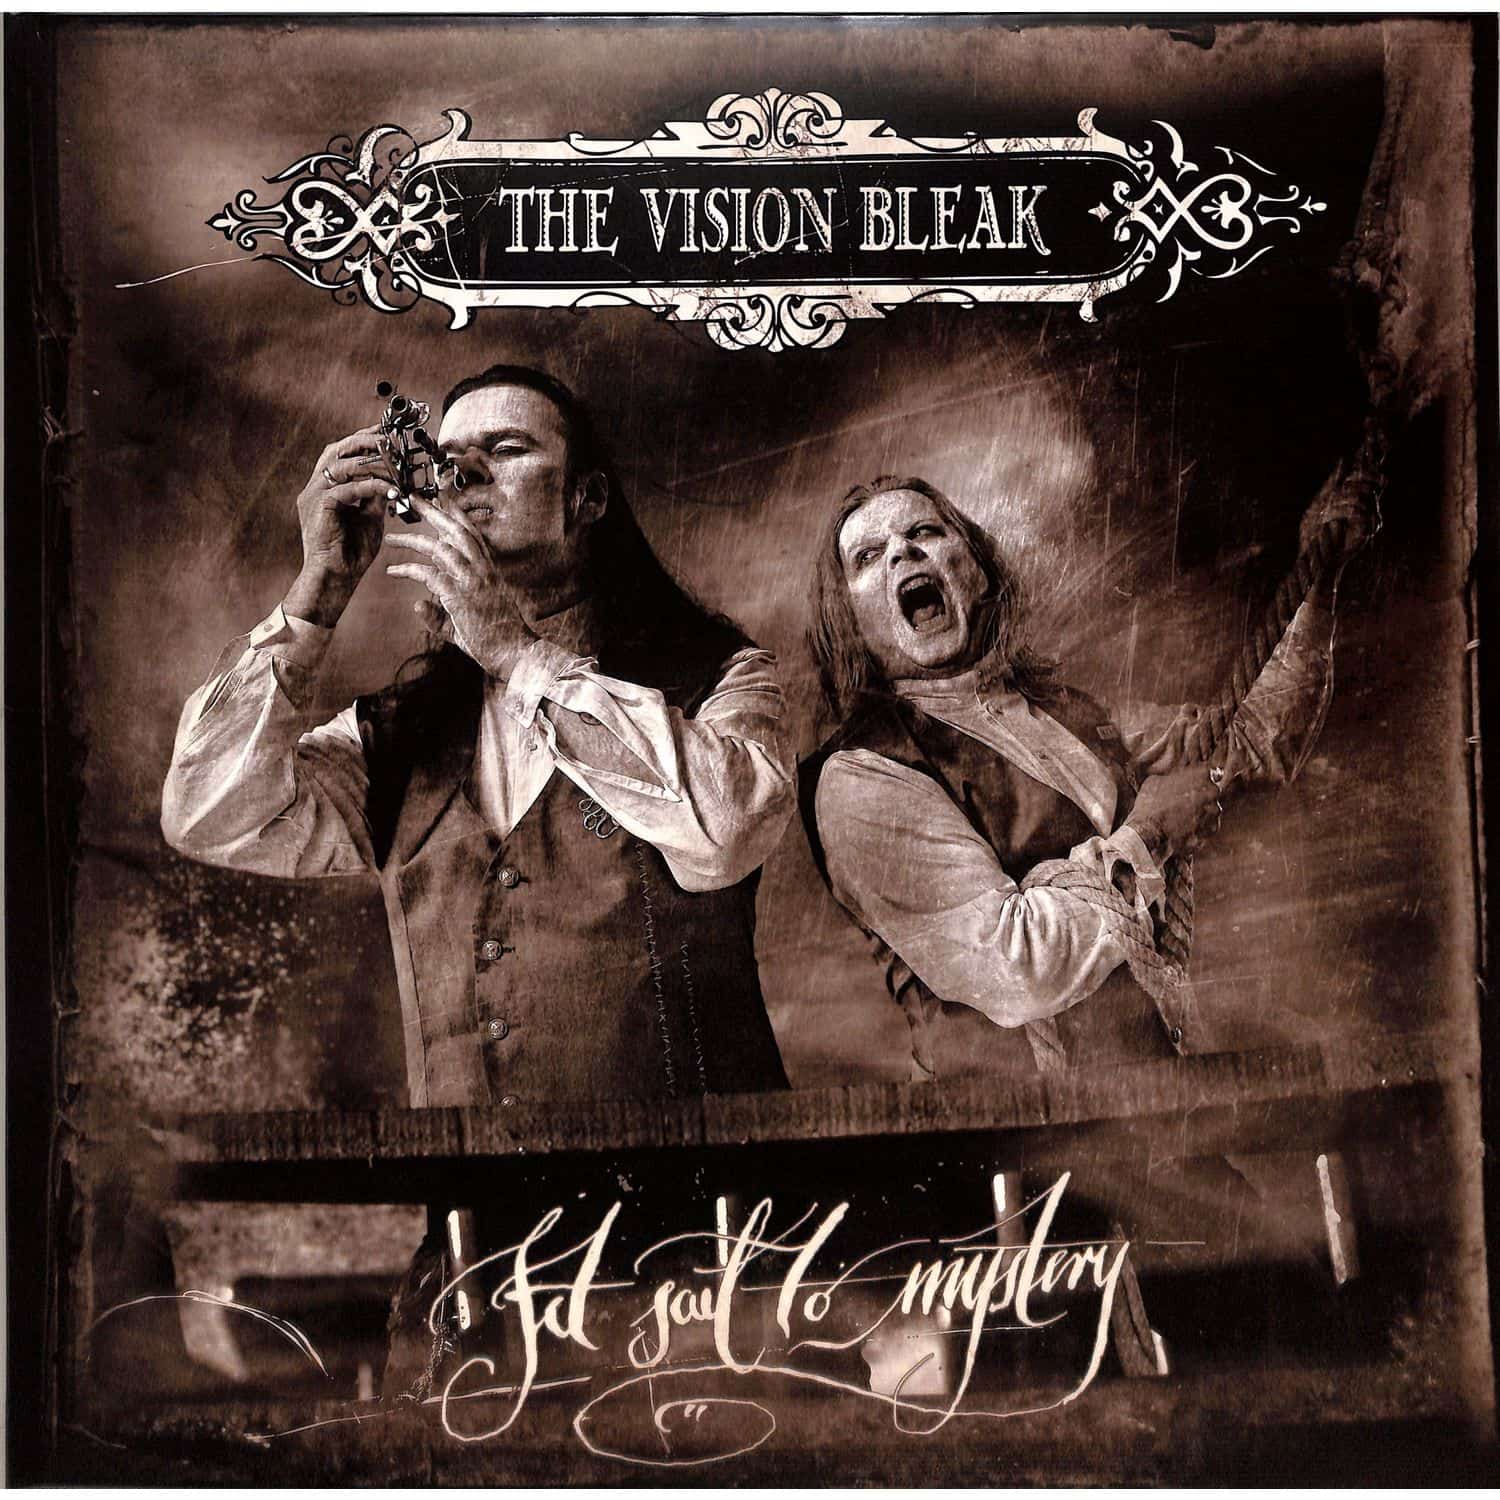 The Vision Bleak - SET SAIL TO MYSTERY 